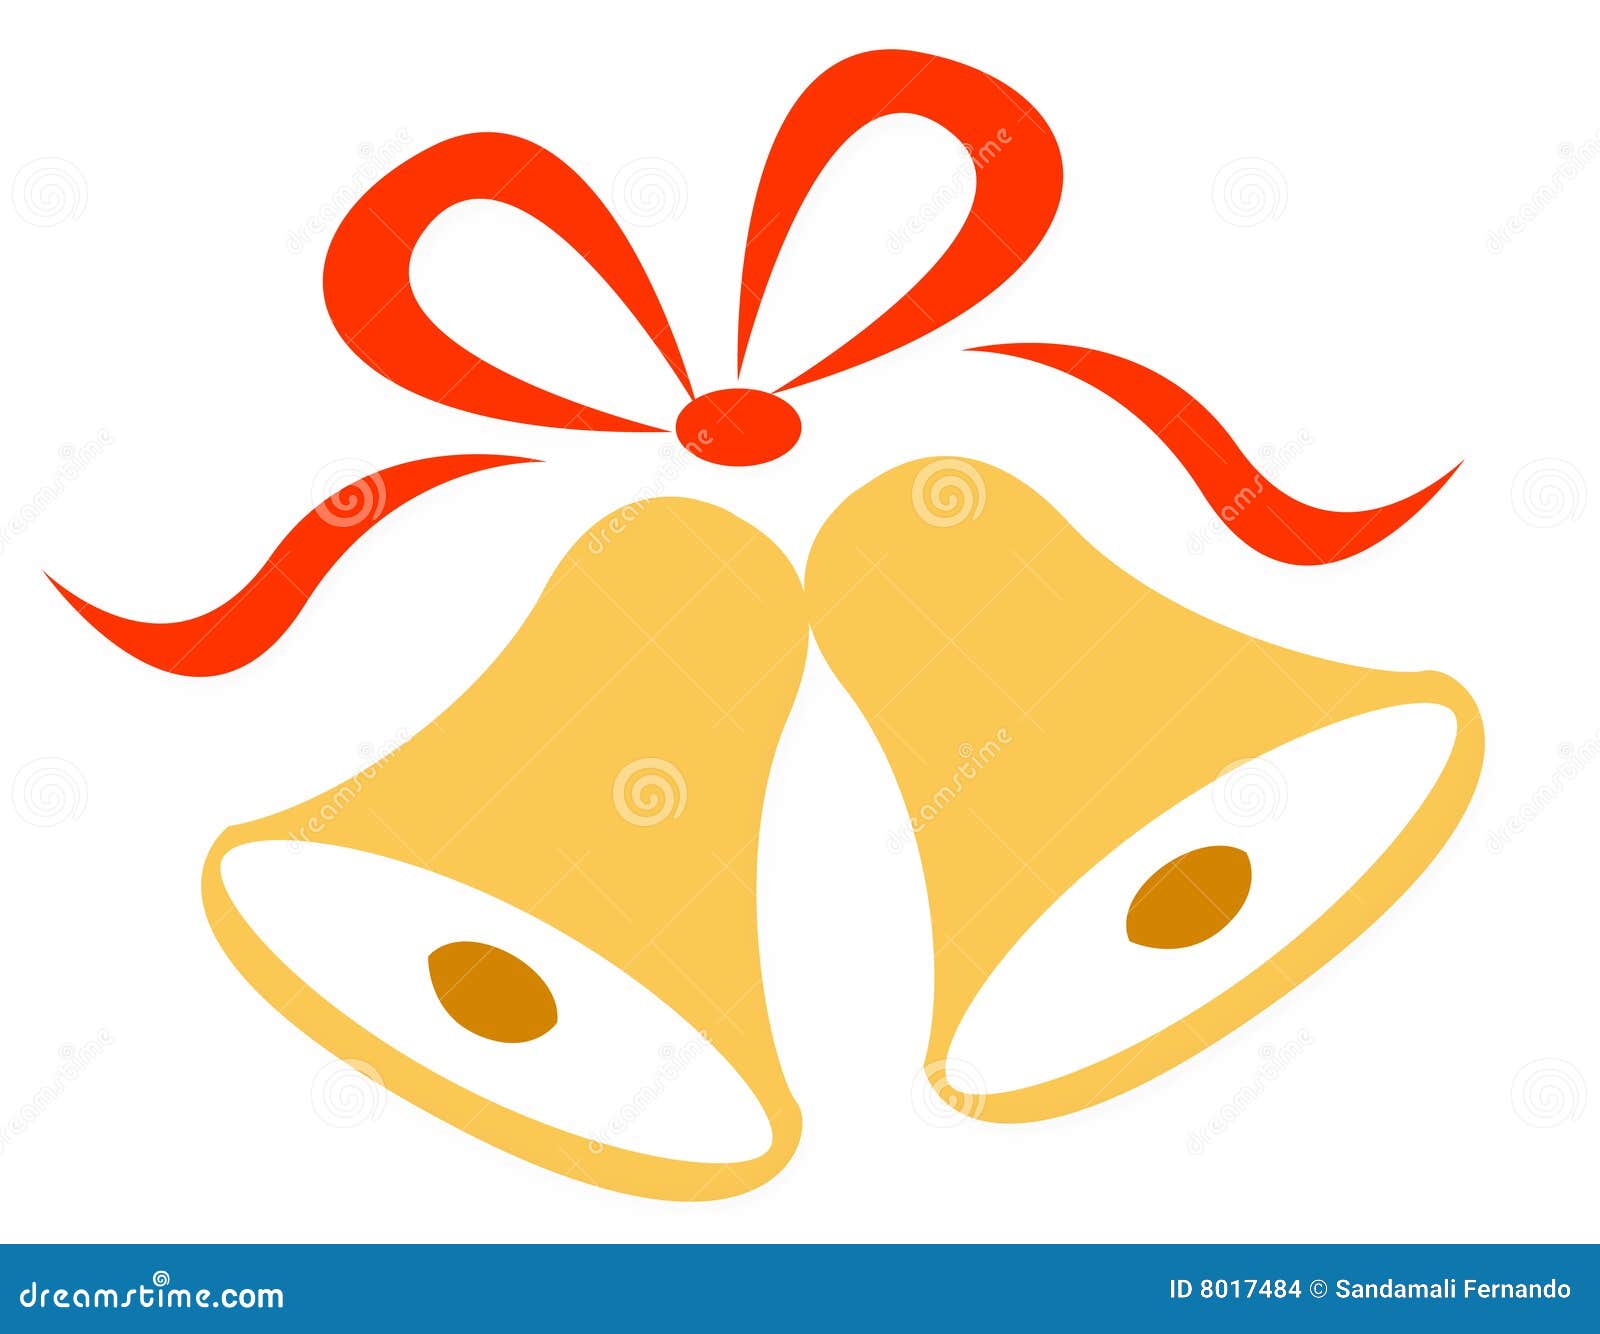 Wedding bells stock vector. Illustration of holiday, backgrounds - 12221392